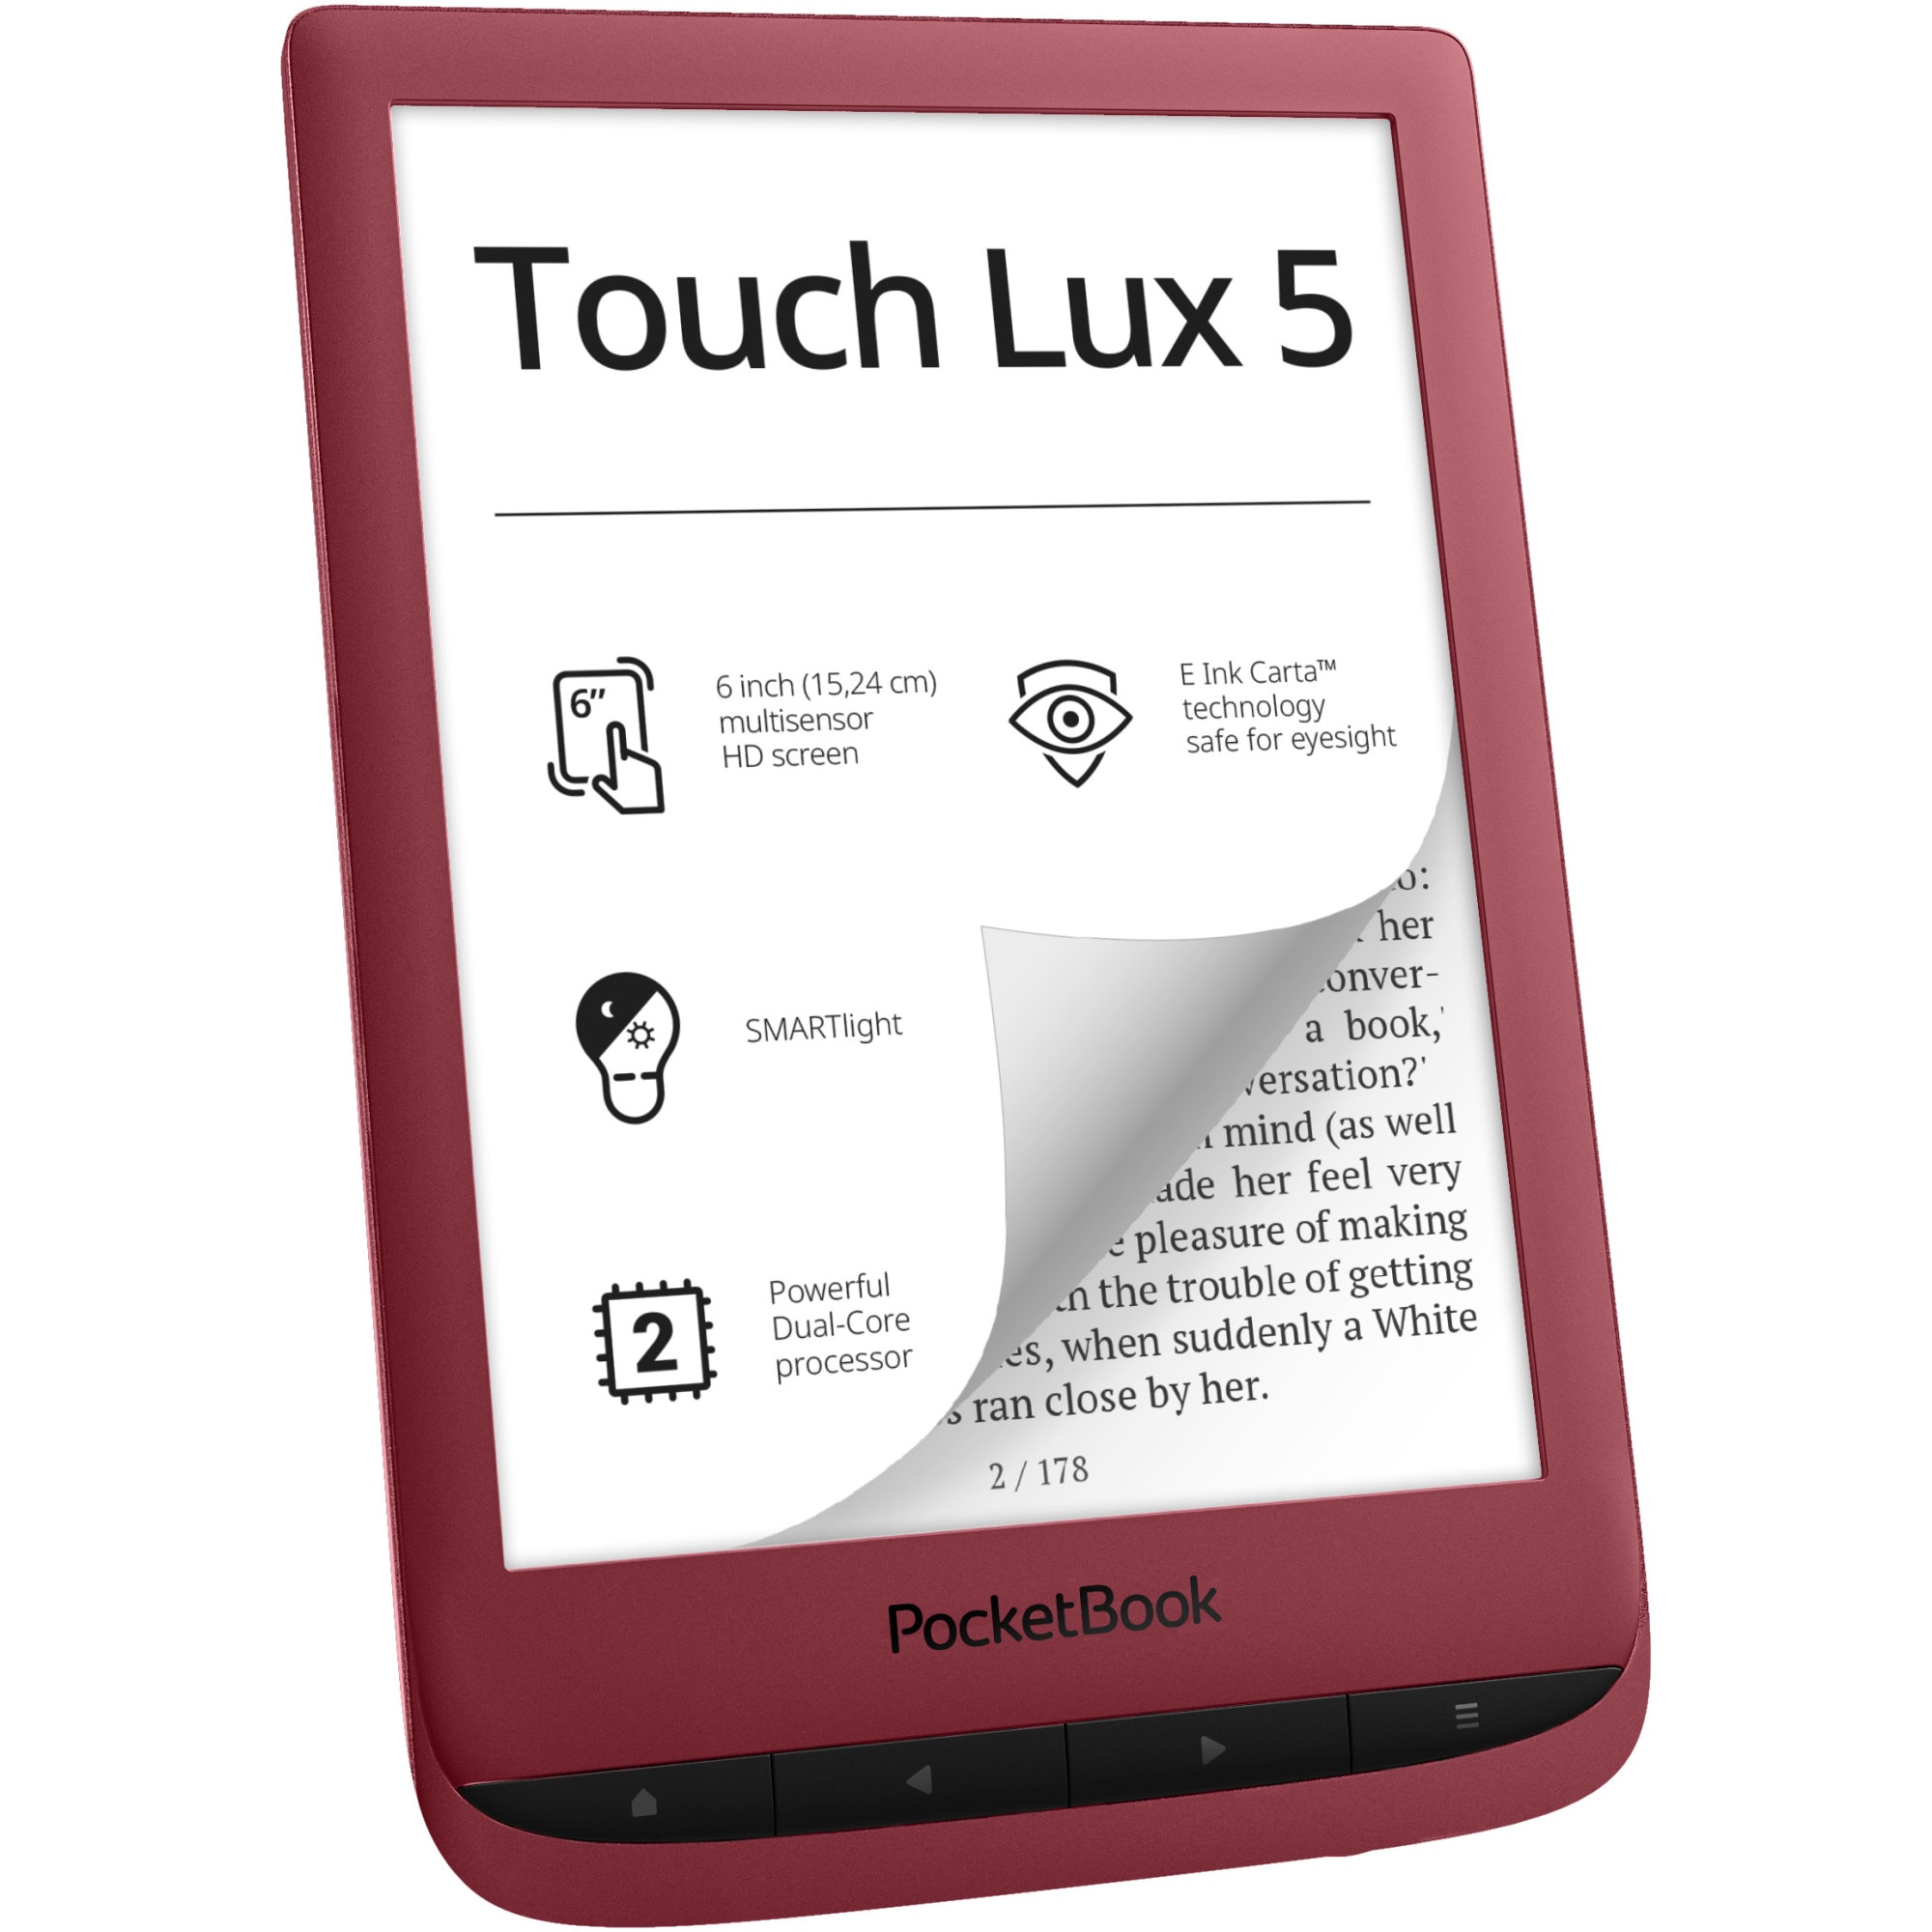 Carte electronica Kindle touch , ebook reader Gilau • OLX.ro